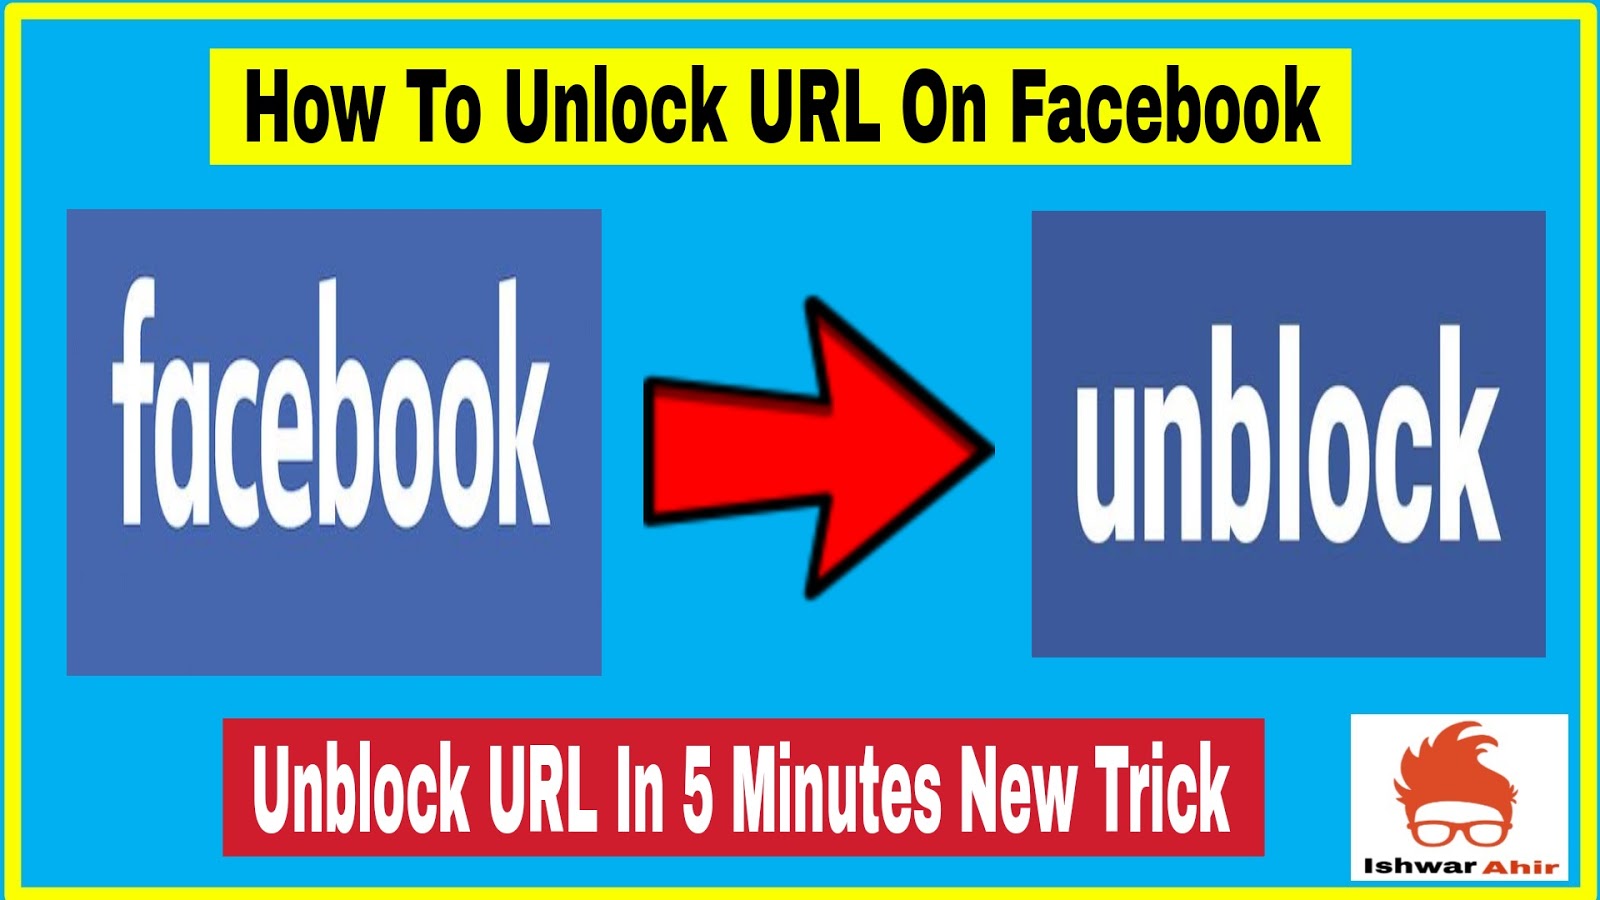 How To Unblock URL On Facebook